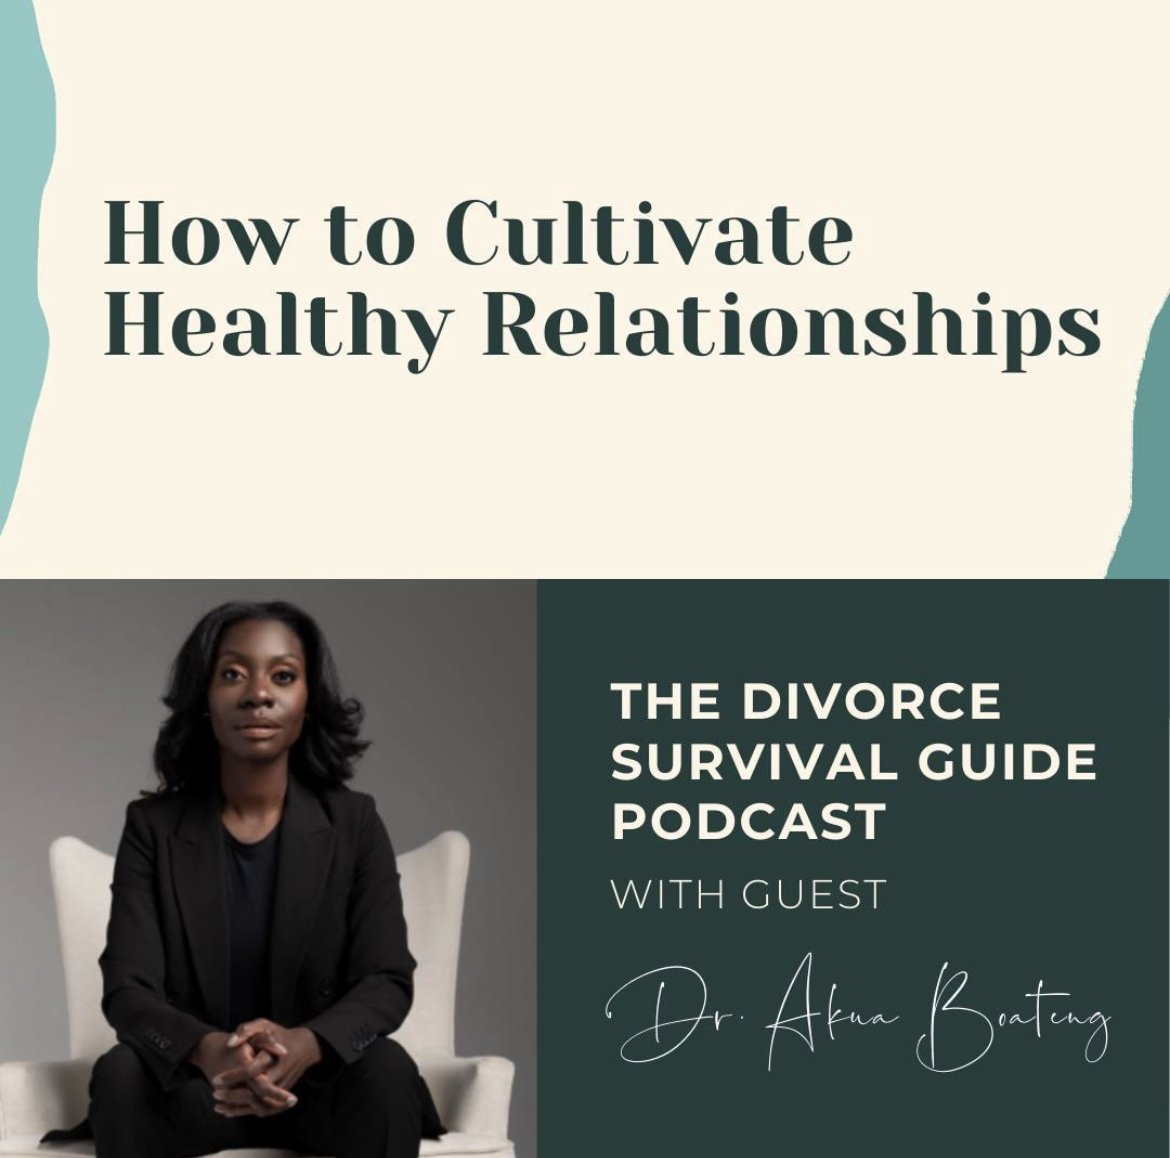   How to Cultivate Healthy Relationships with Dr. Akua Boateng   The Divorce Survival Guide Podcast   Self-Improvement    Listen on  Apple Podcasts     This week I am talking all about healthy relationships with Dr. Akua K. Boateng. Dr. Akua answers 